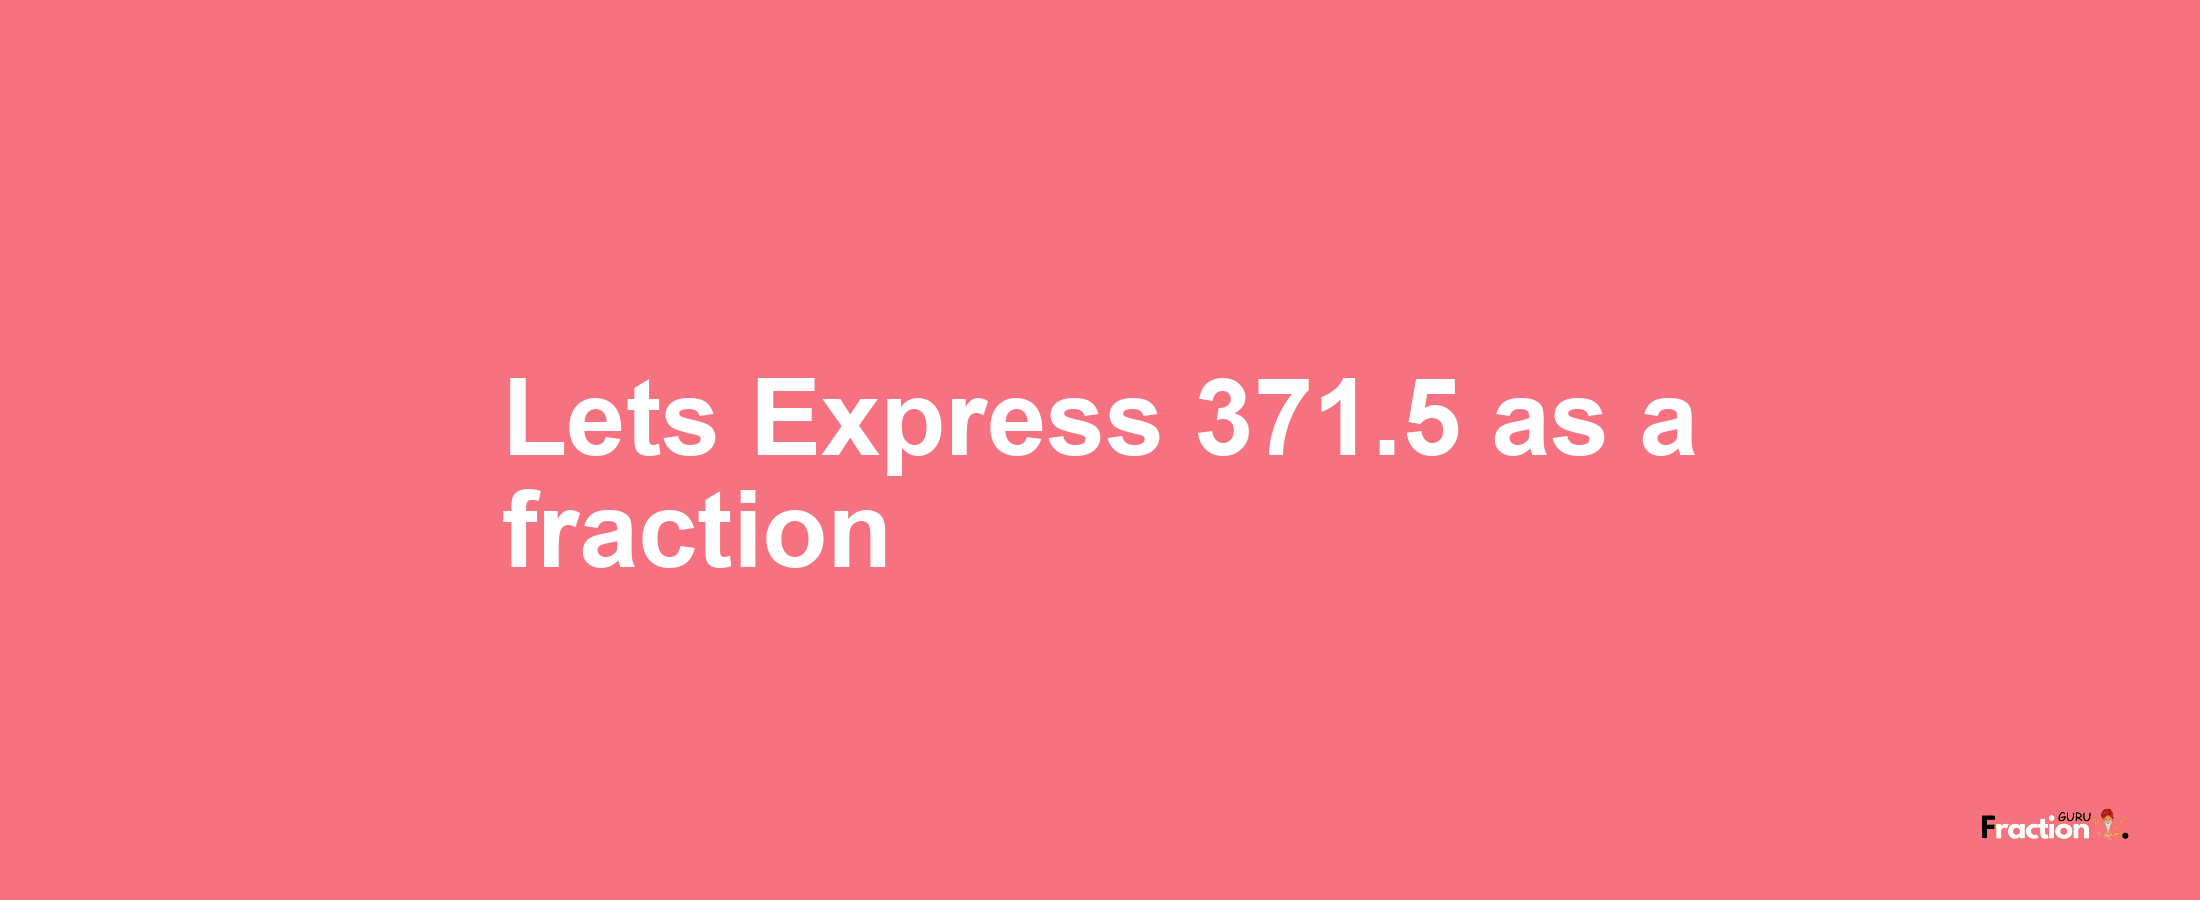 Lets Express 371.5 as afraction